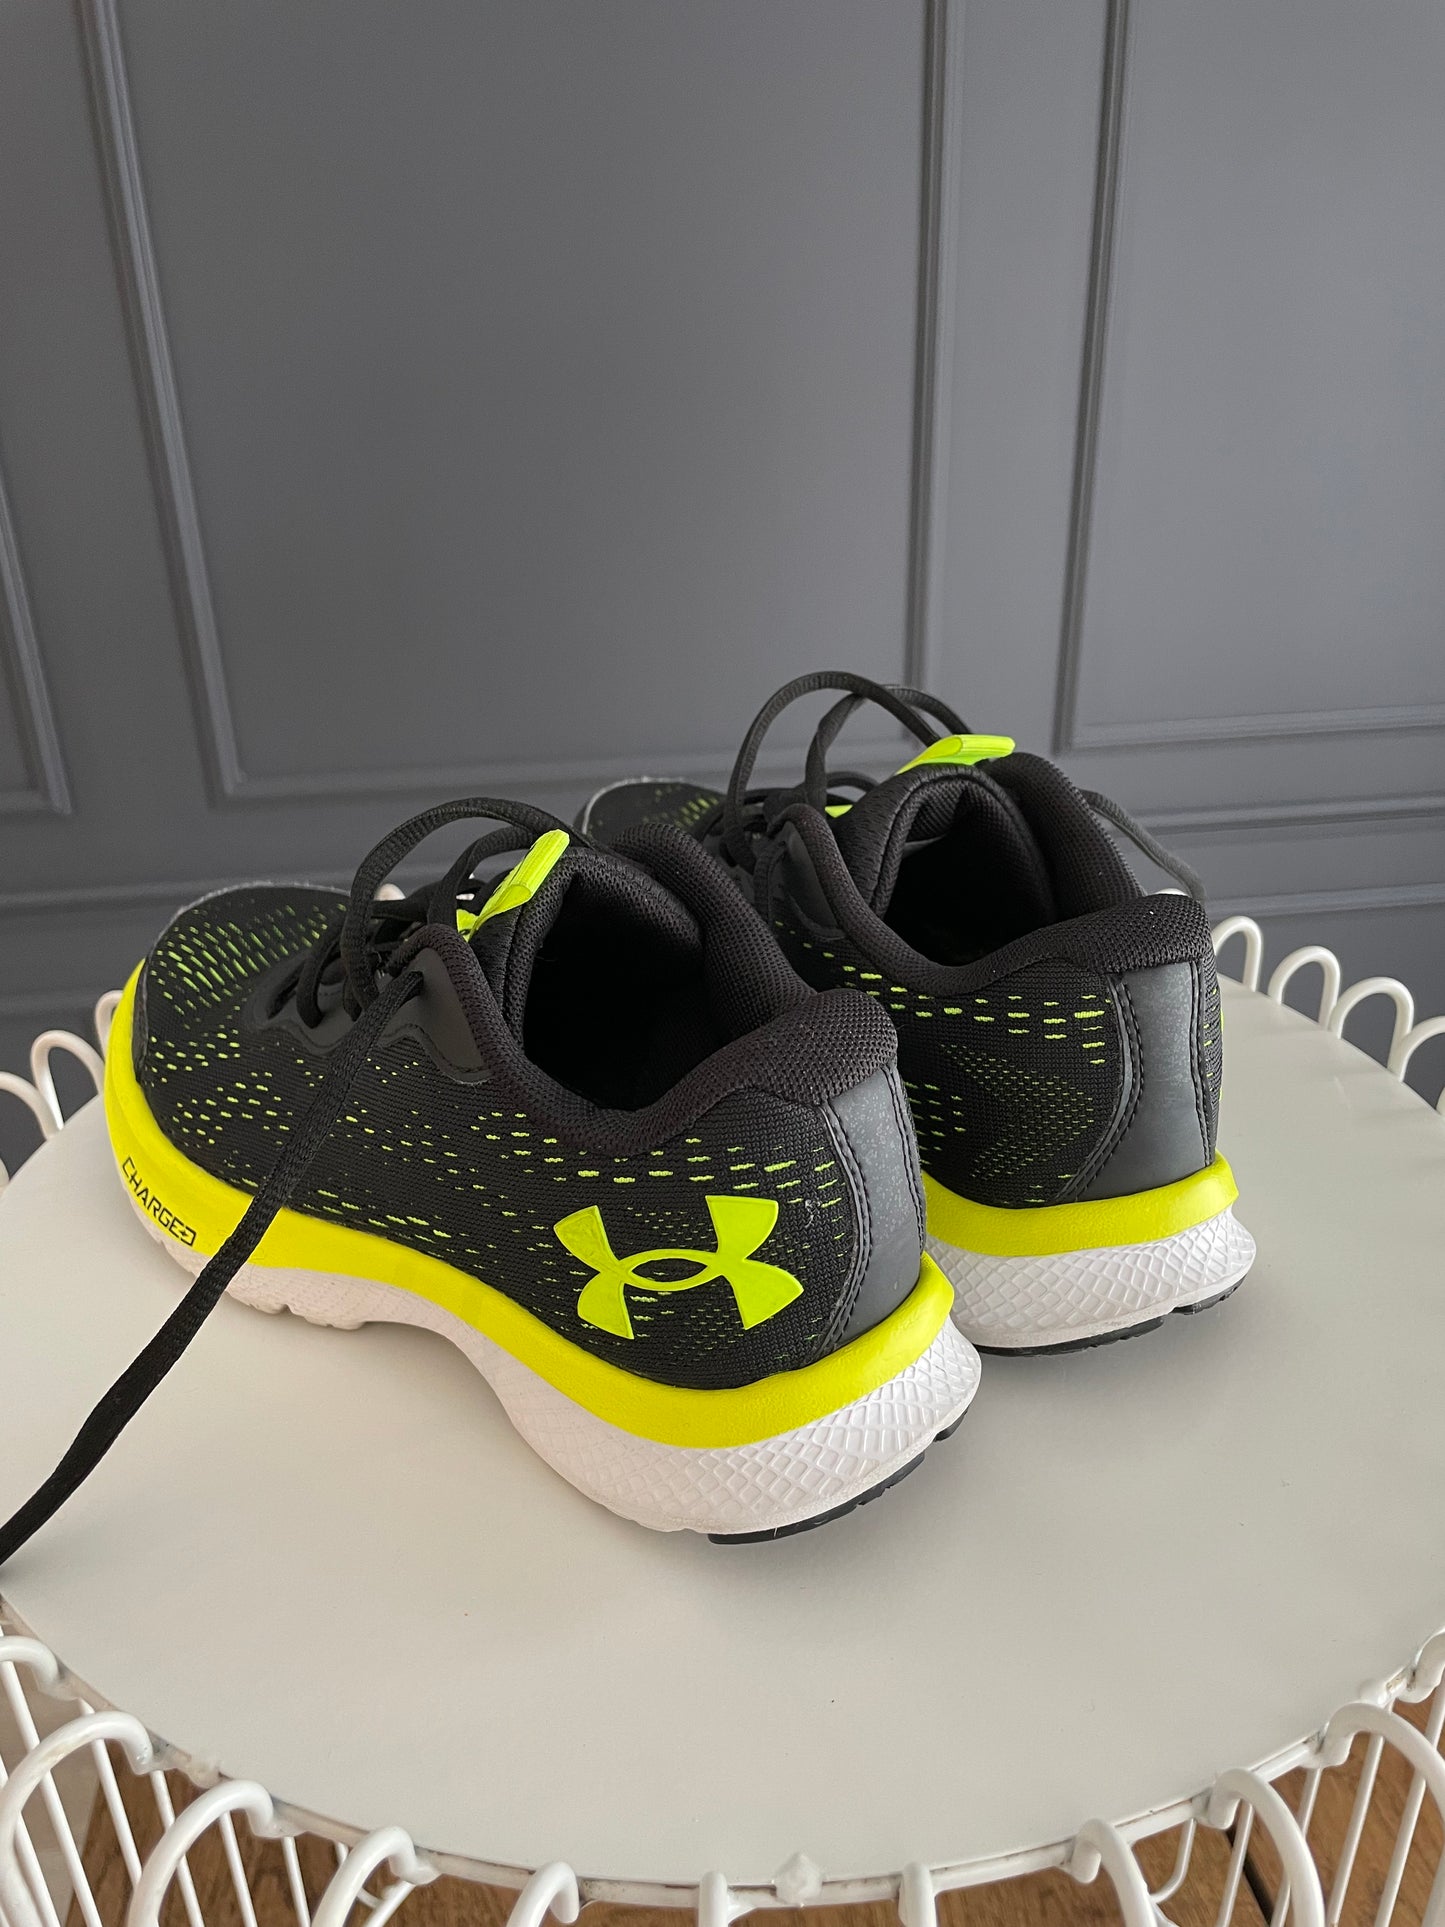 Under Armour Youth Size 3.5